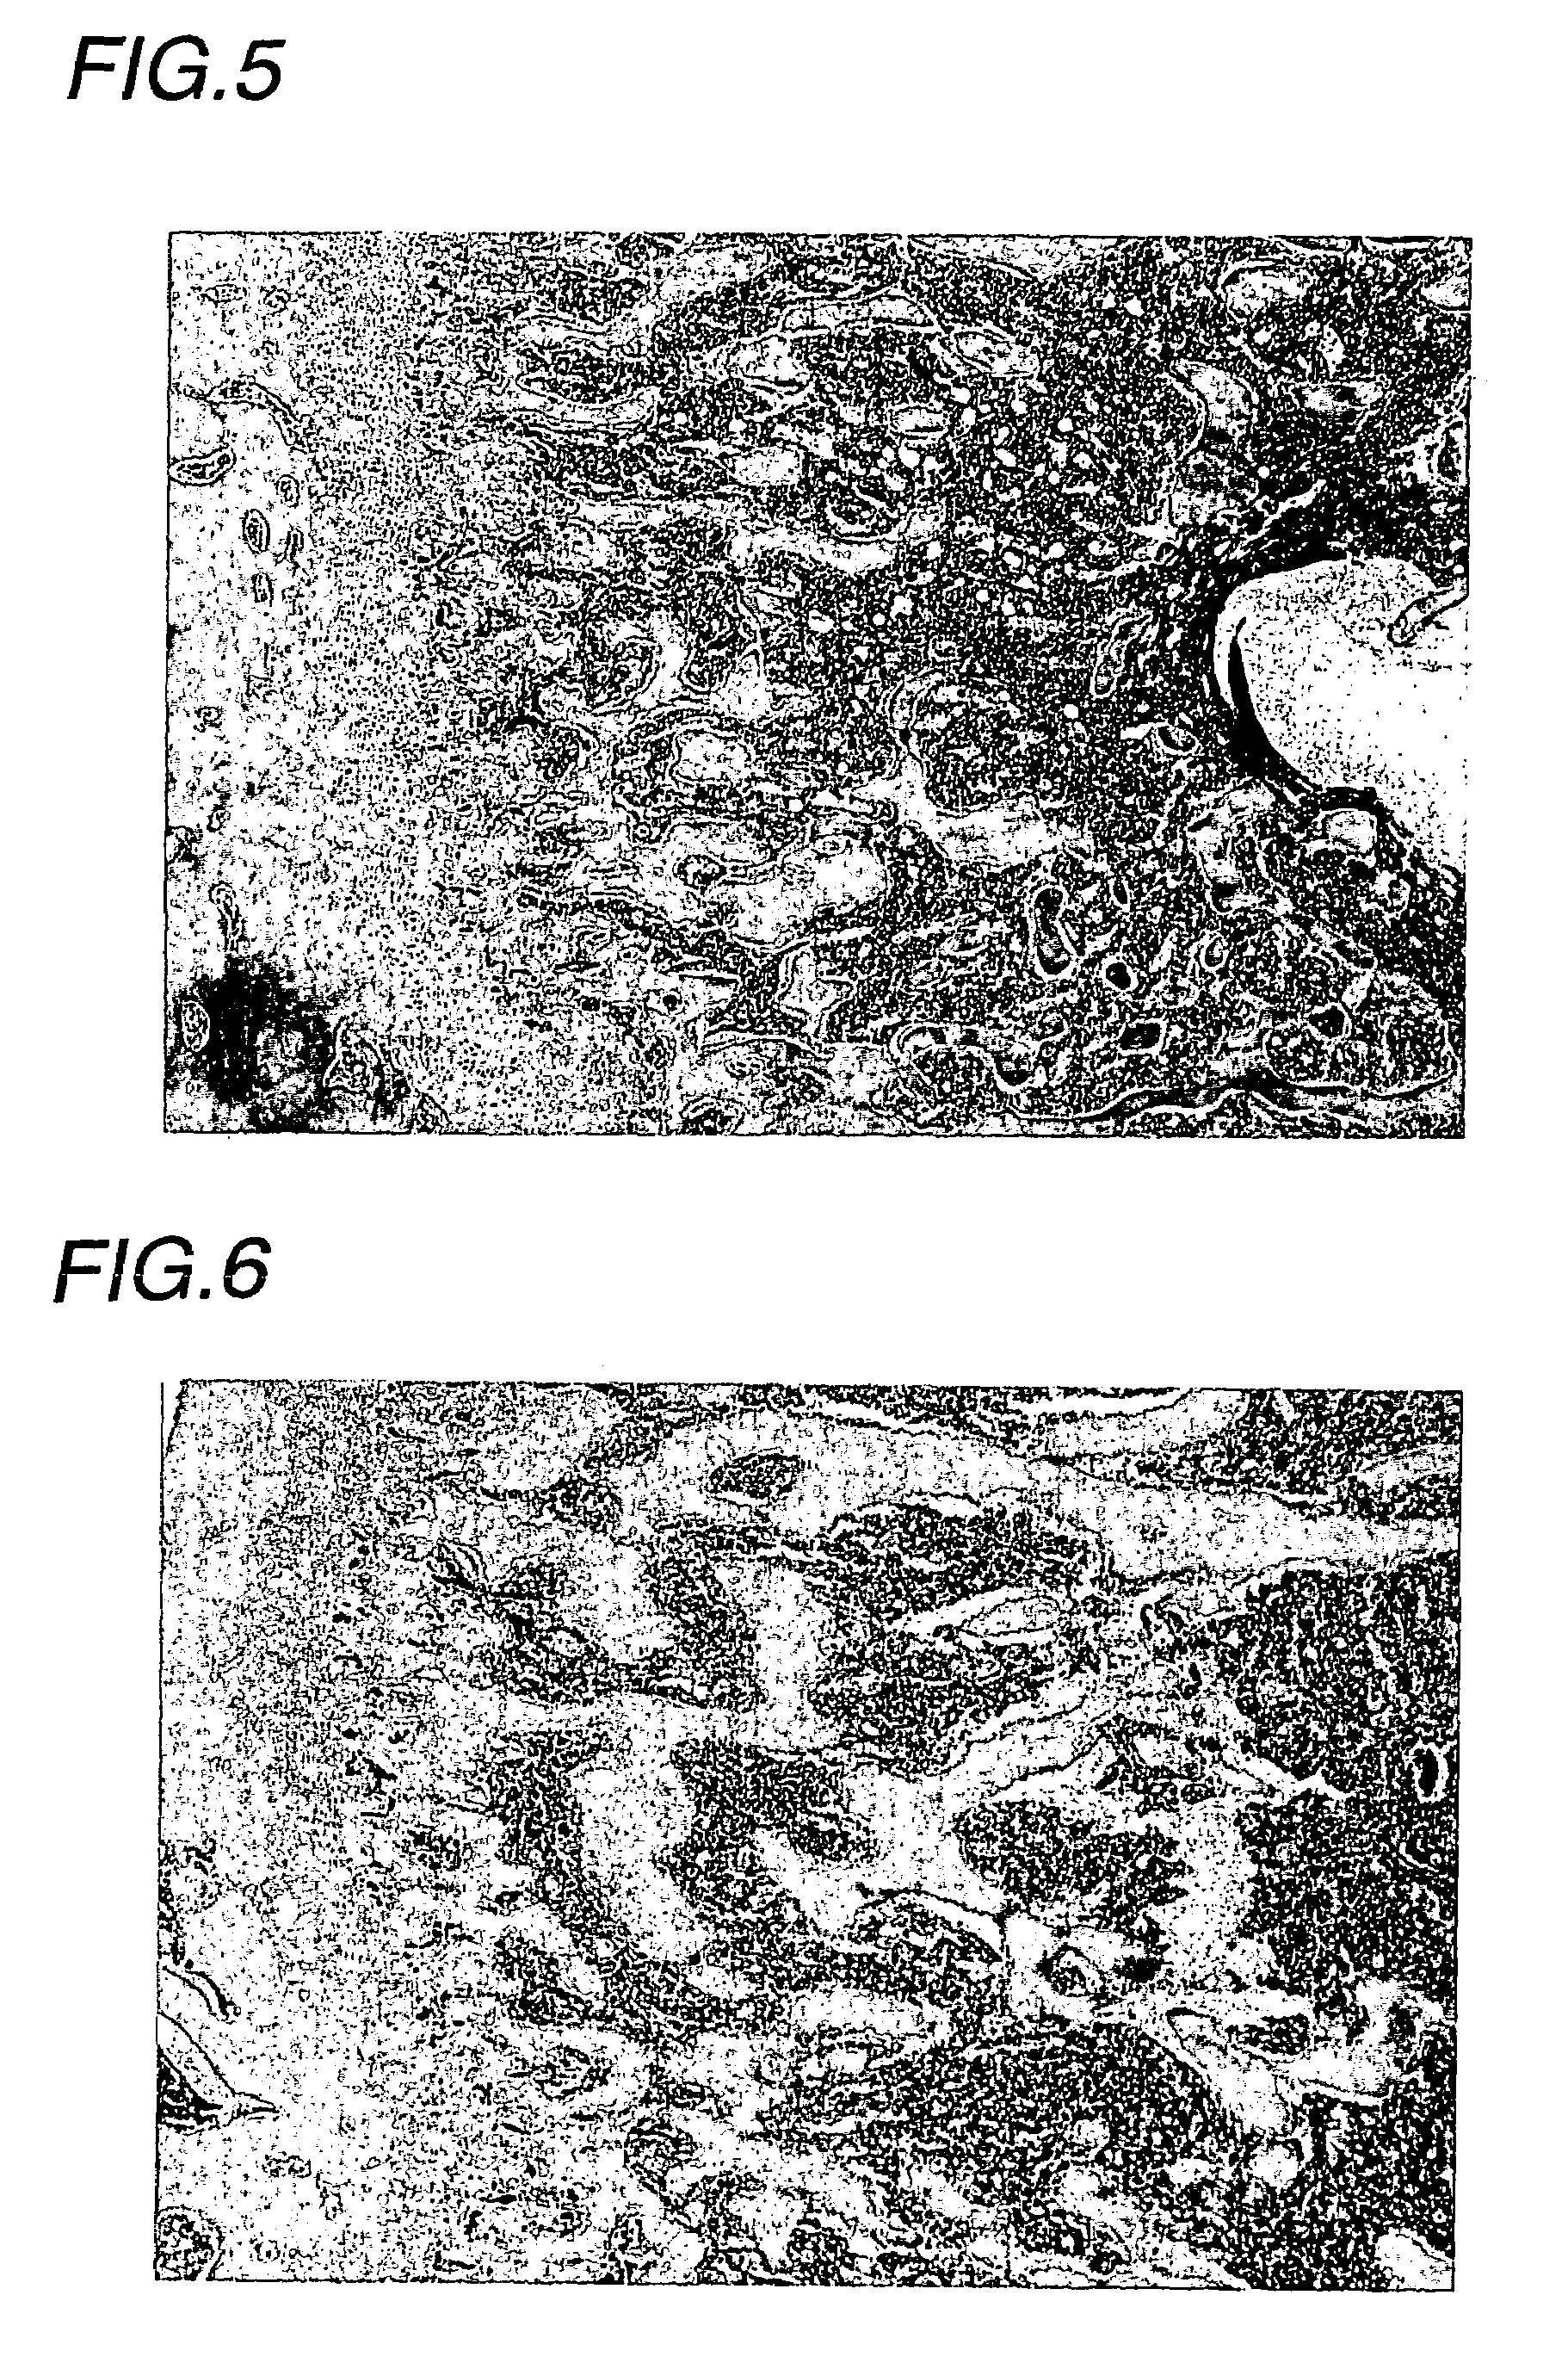 Agent for treatment of metabolic bone disease